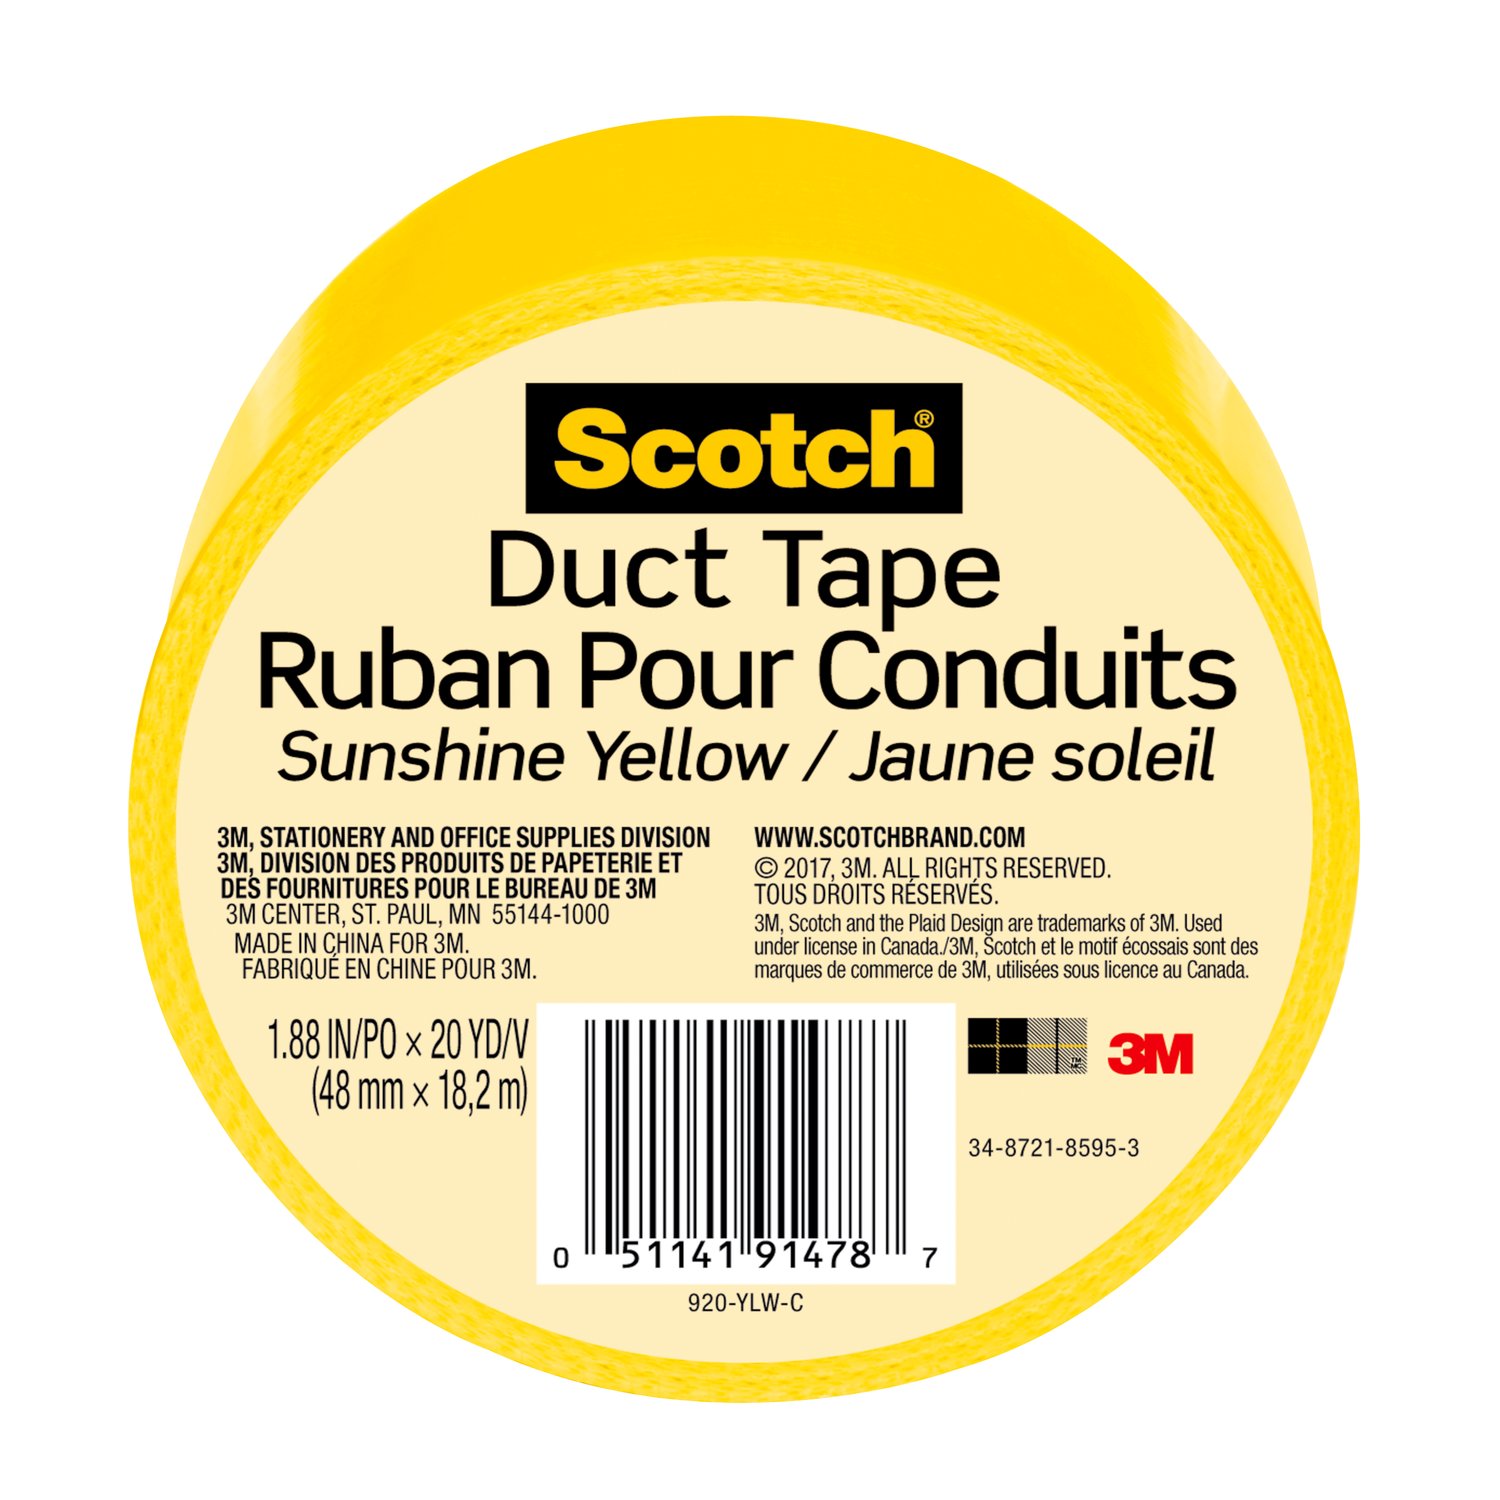 7100166629 - Scotch Duct Tape 920-YLW-C, 1.88 in x 20 yd (48 mm x 18,2 m), Yellow